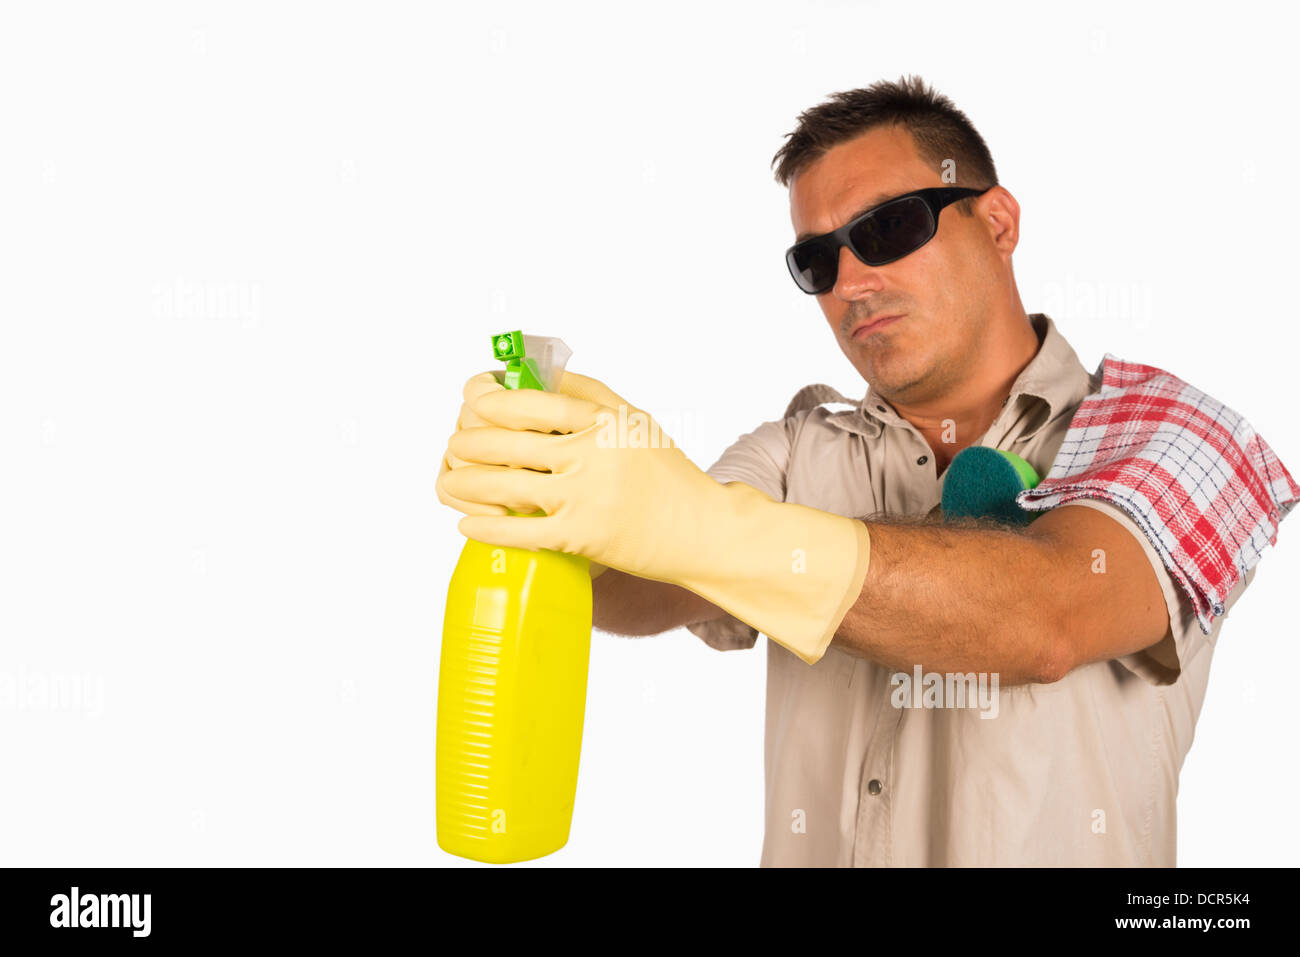 Mr. cleaning, Latin male cleaning his house Stock Photo